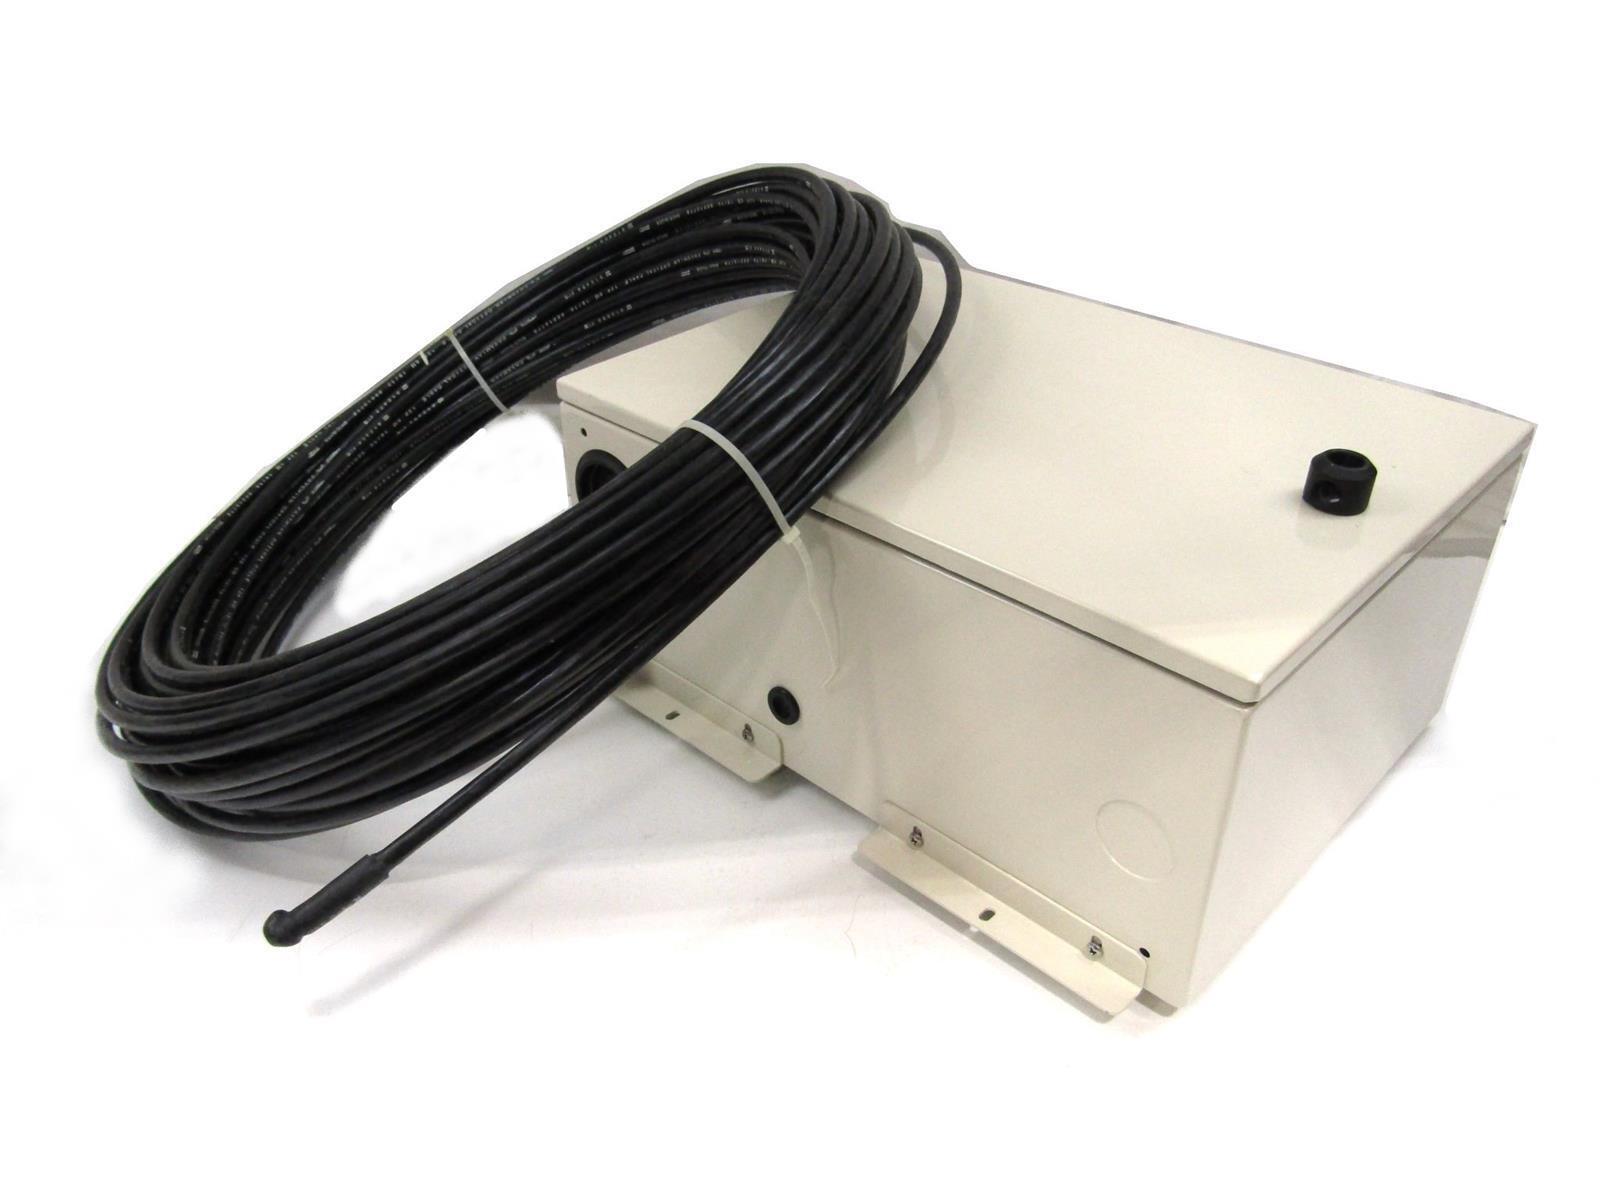 New-Open CommScope FDT-GJ006NXT2000 Outdoor Fiber Distribution Terminal w/ Cable